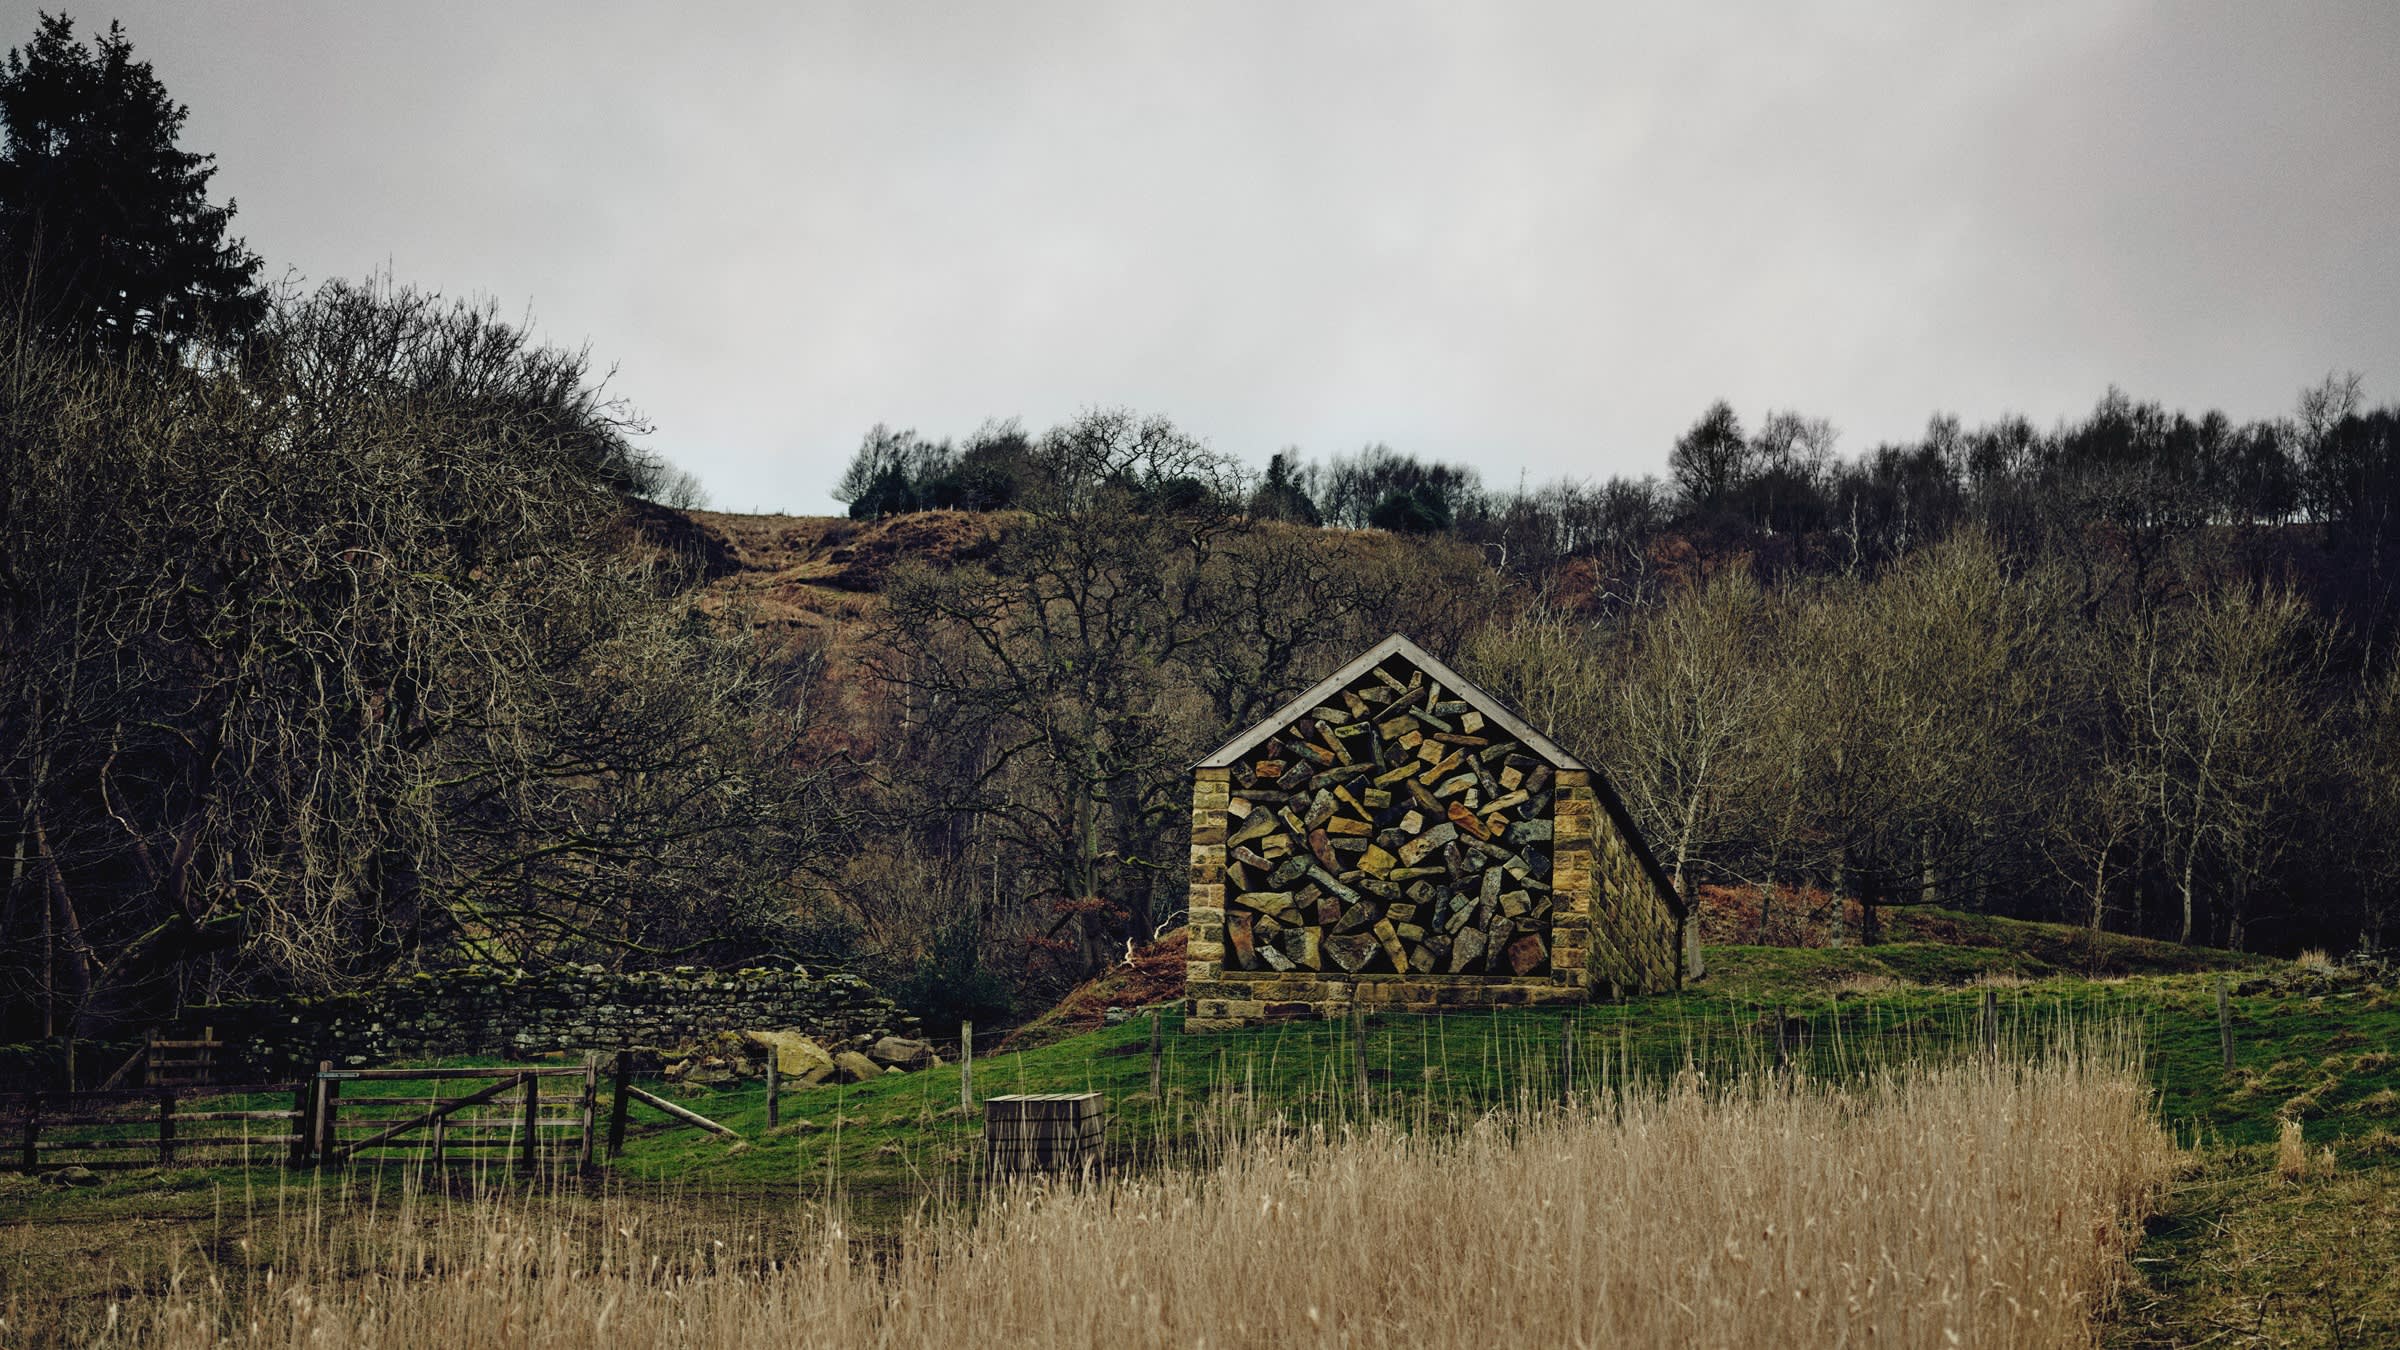 One of the 10 houses on Goldsworthy’s Hanging Stones land artwork in Rosedale, North York Moors National Park